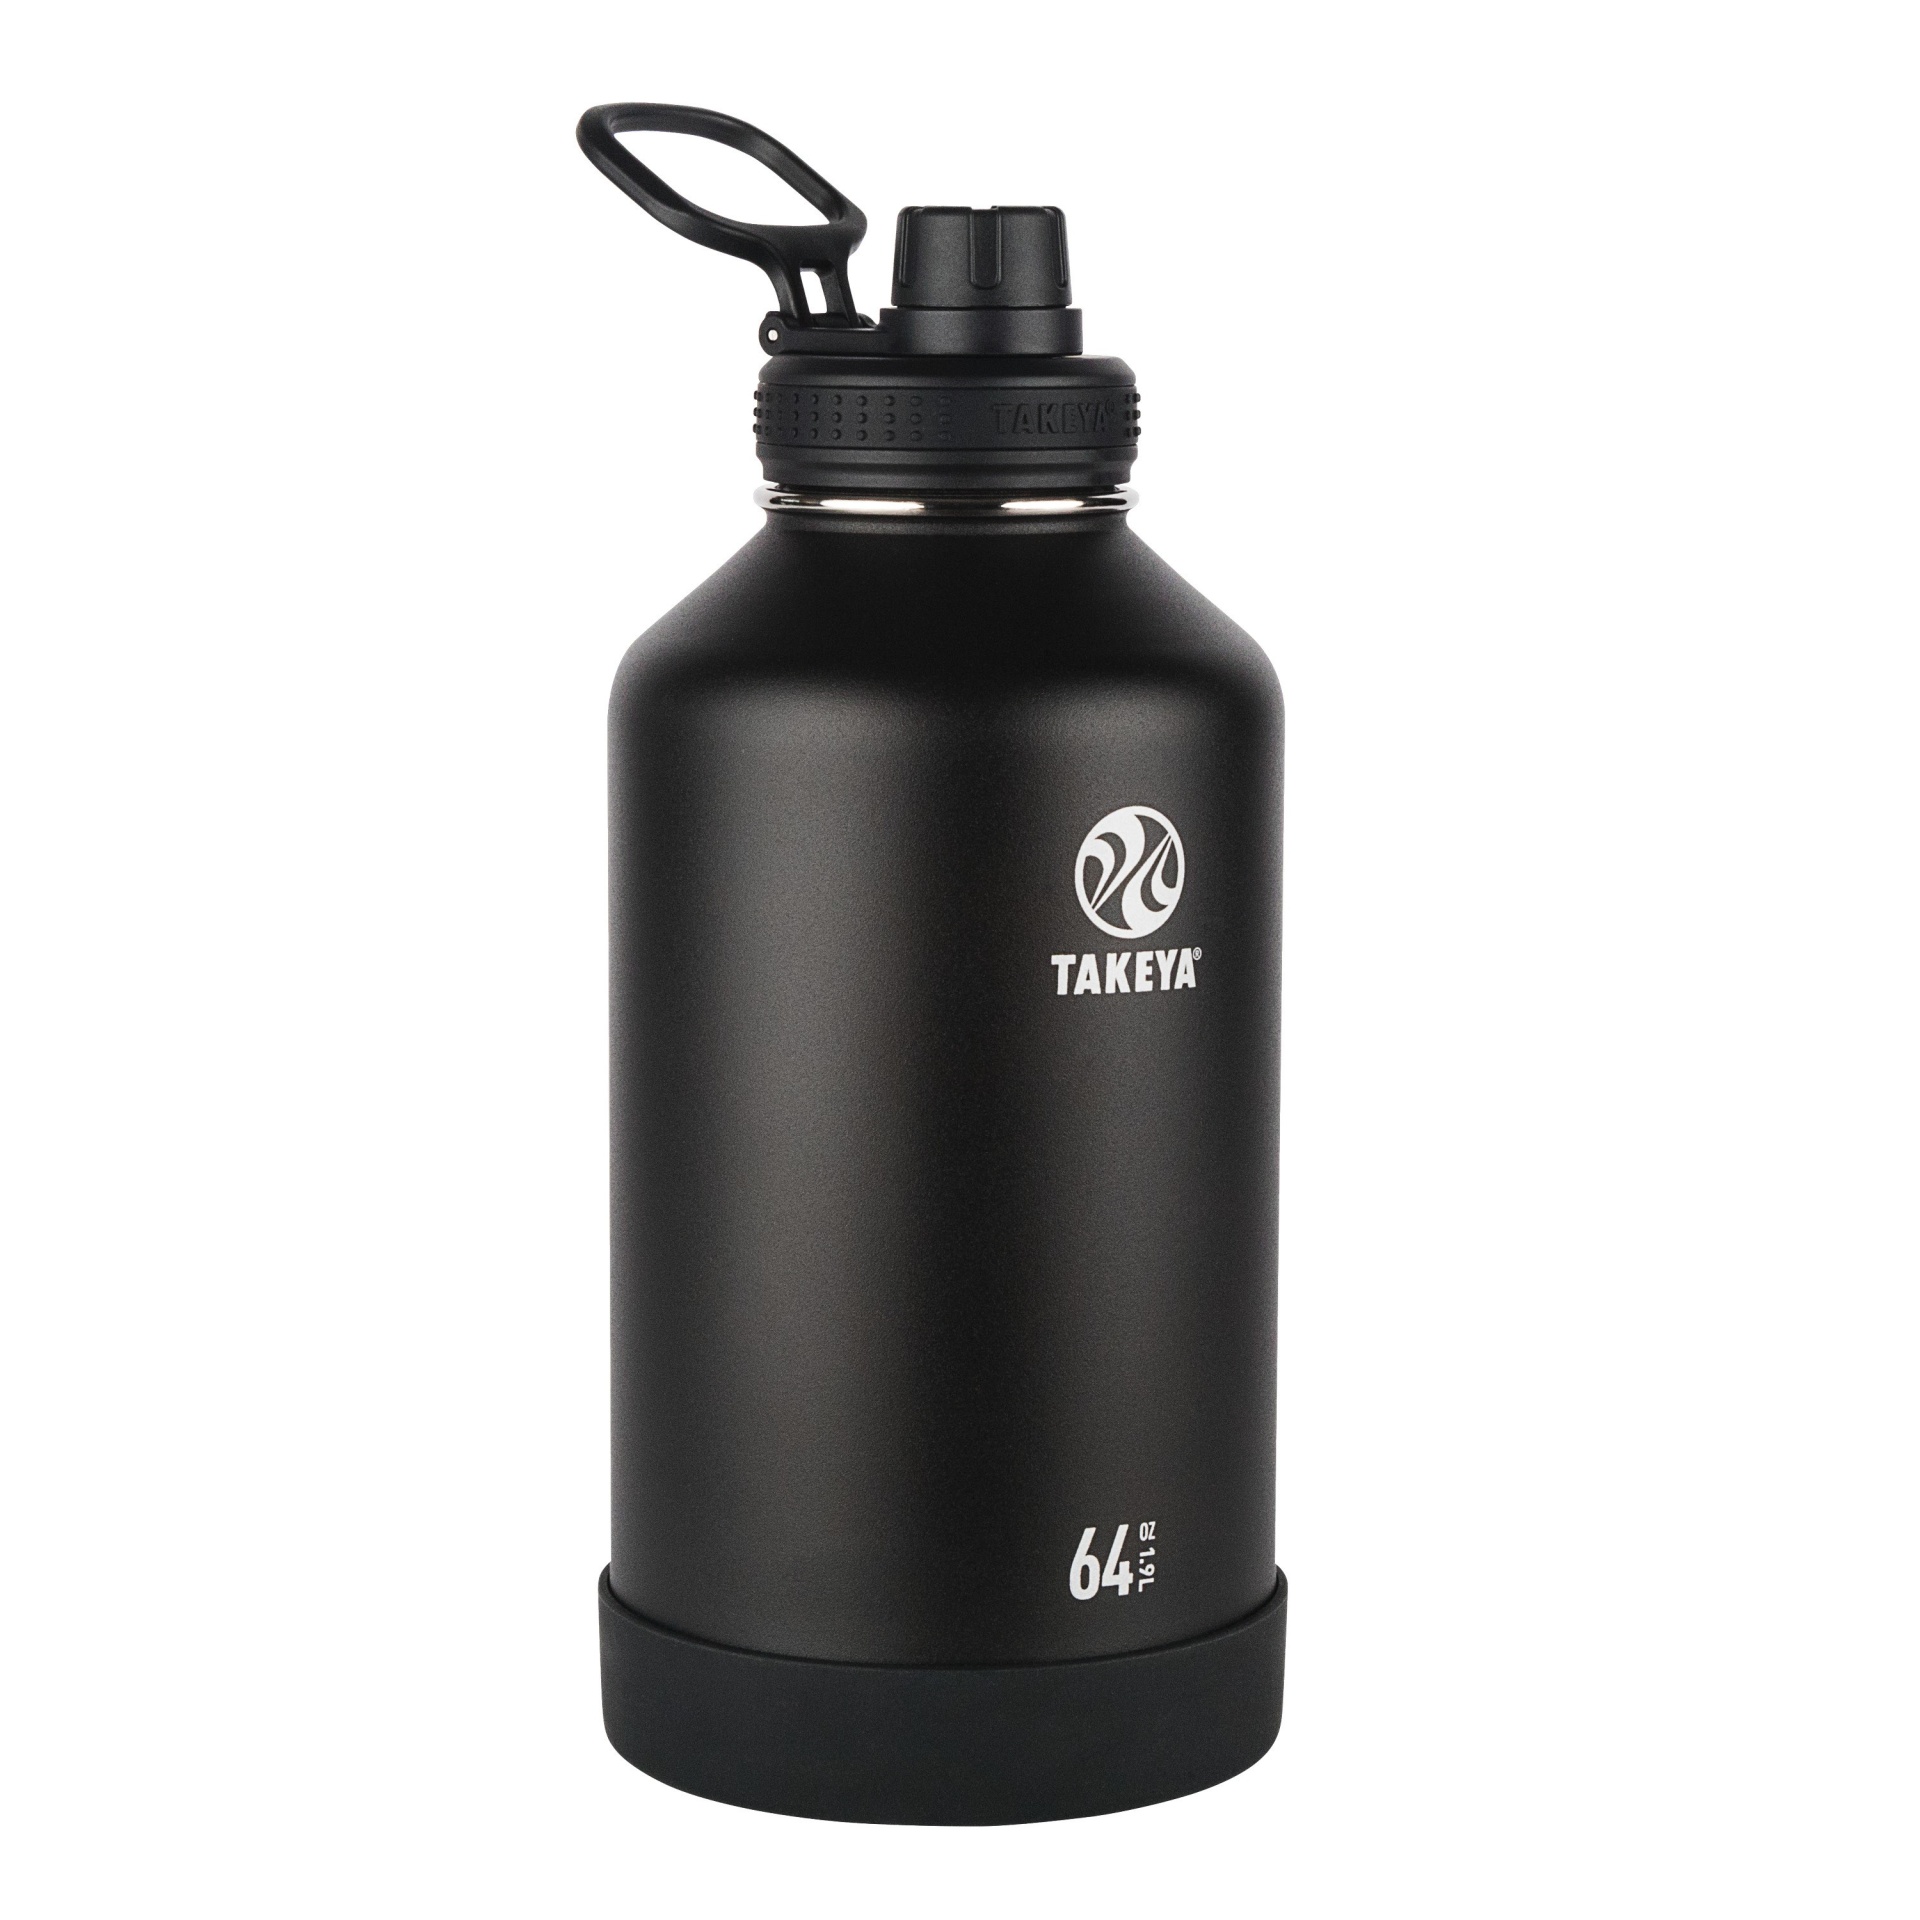 slide 1 of 5, Takeya Actives Insulated Stainless Steel Water Bottle with Spout Lid - Black, 64 oz